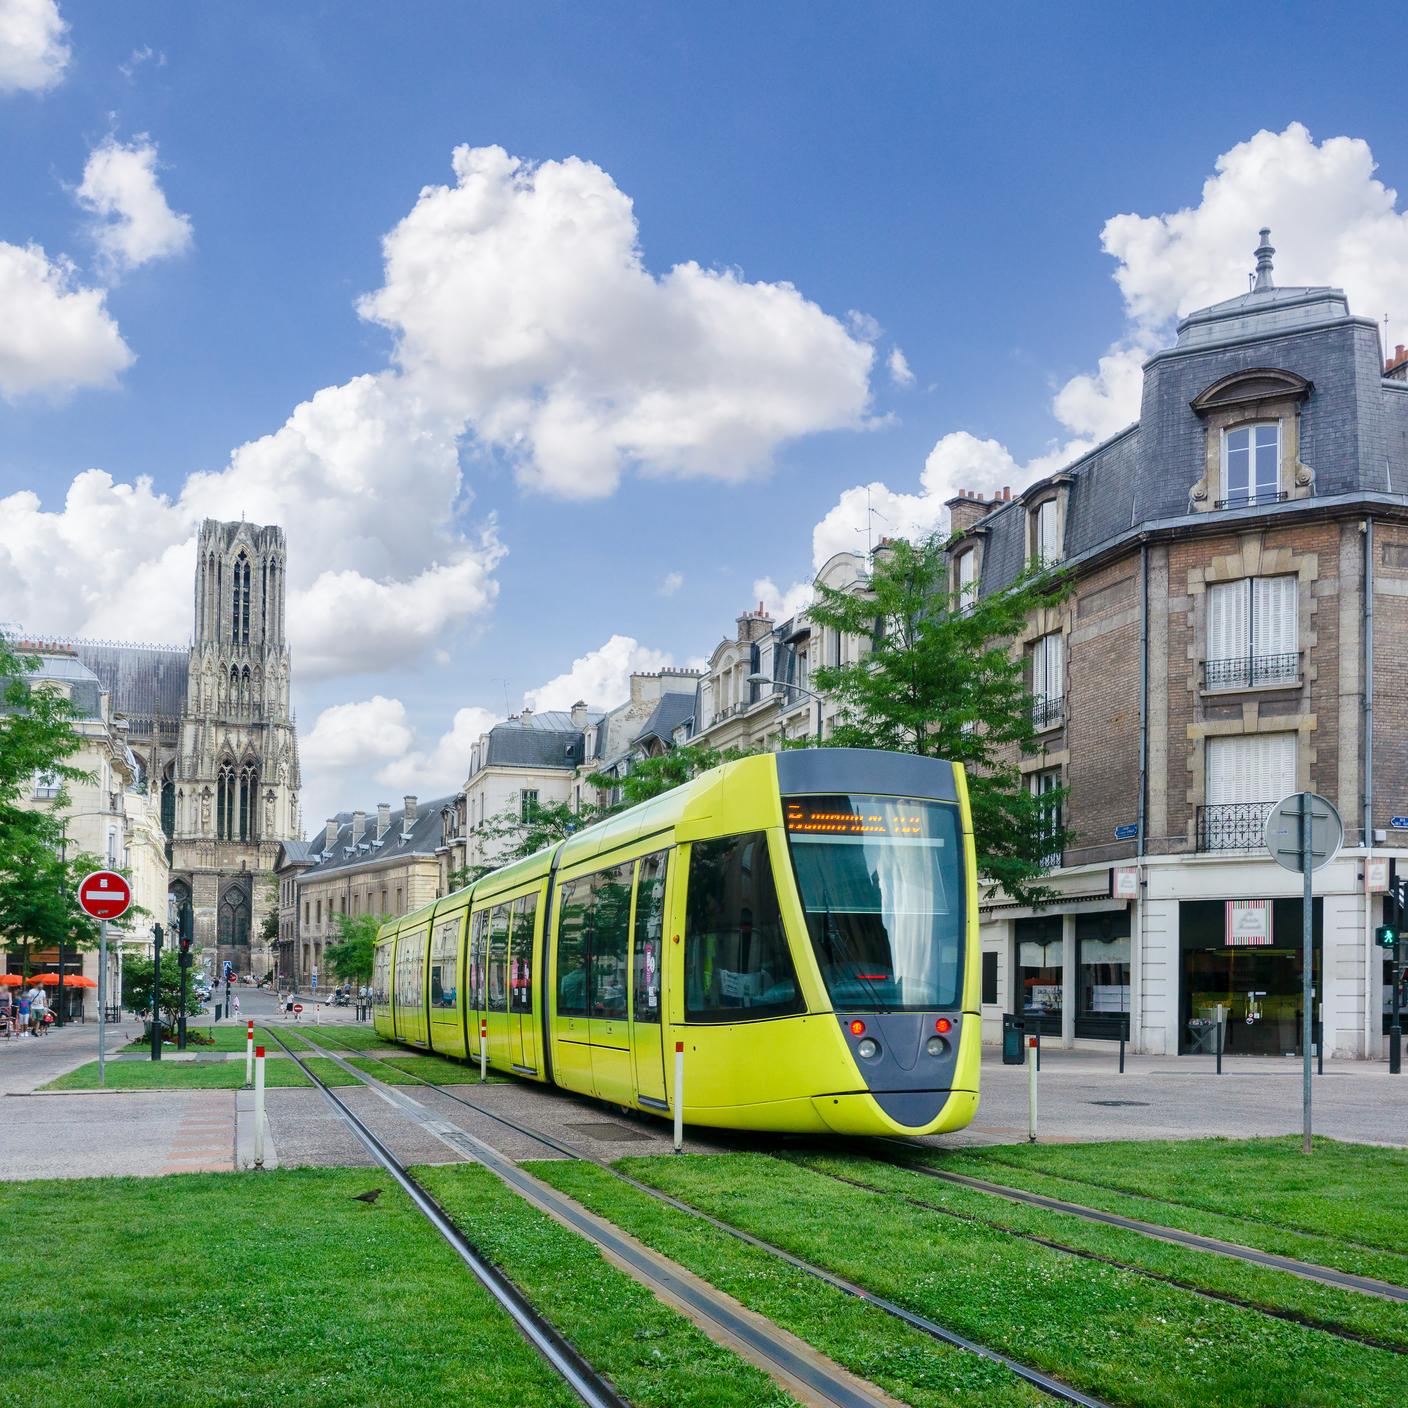 A tram running through the streets of city in France